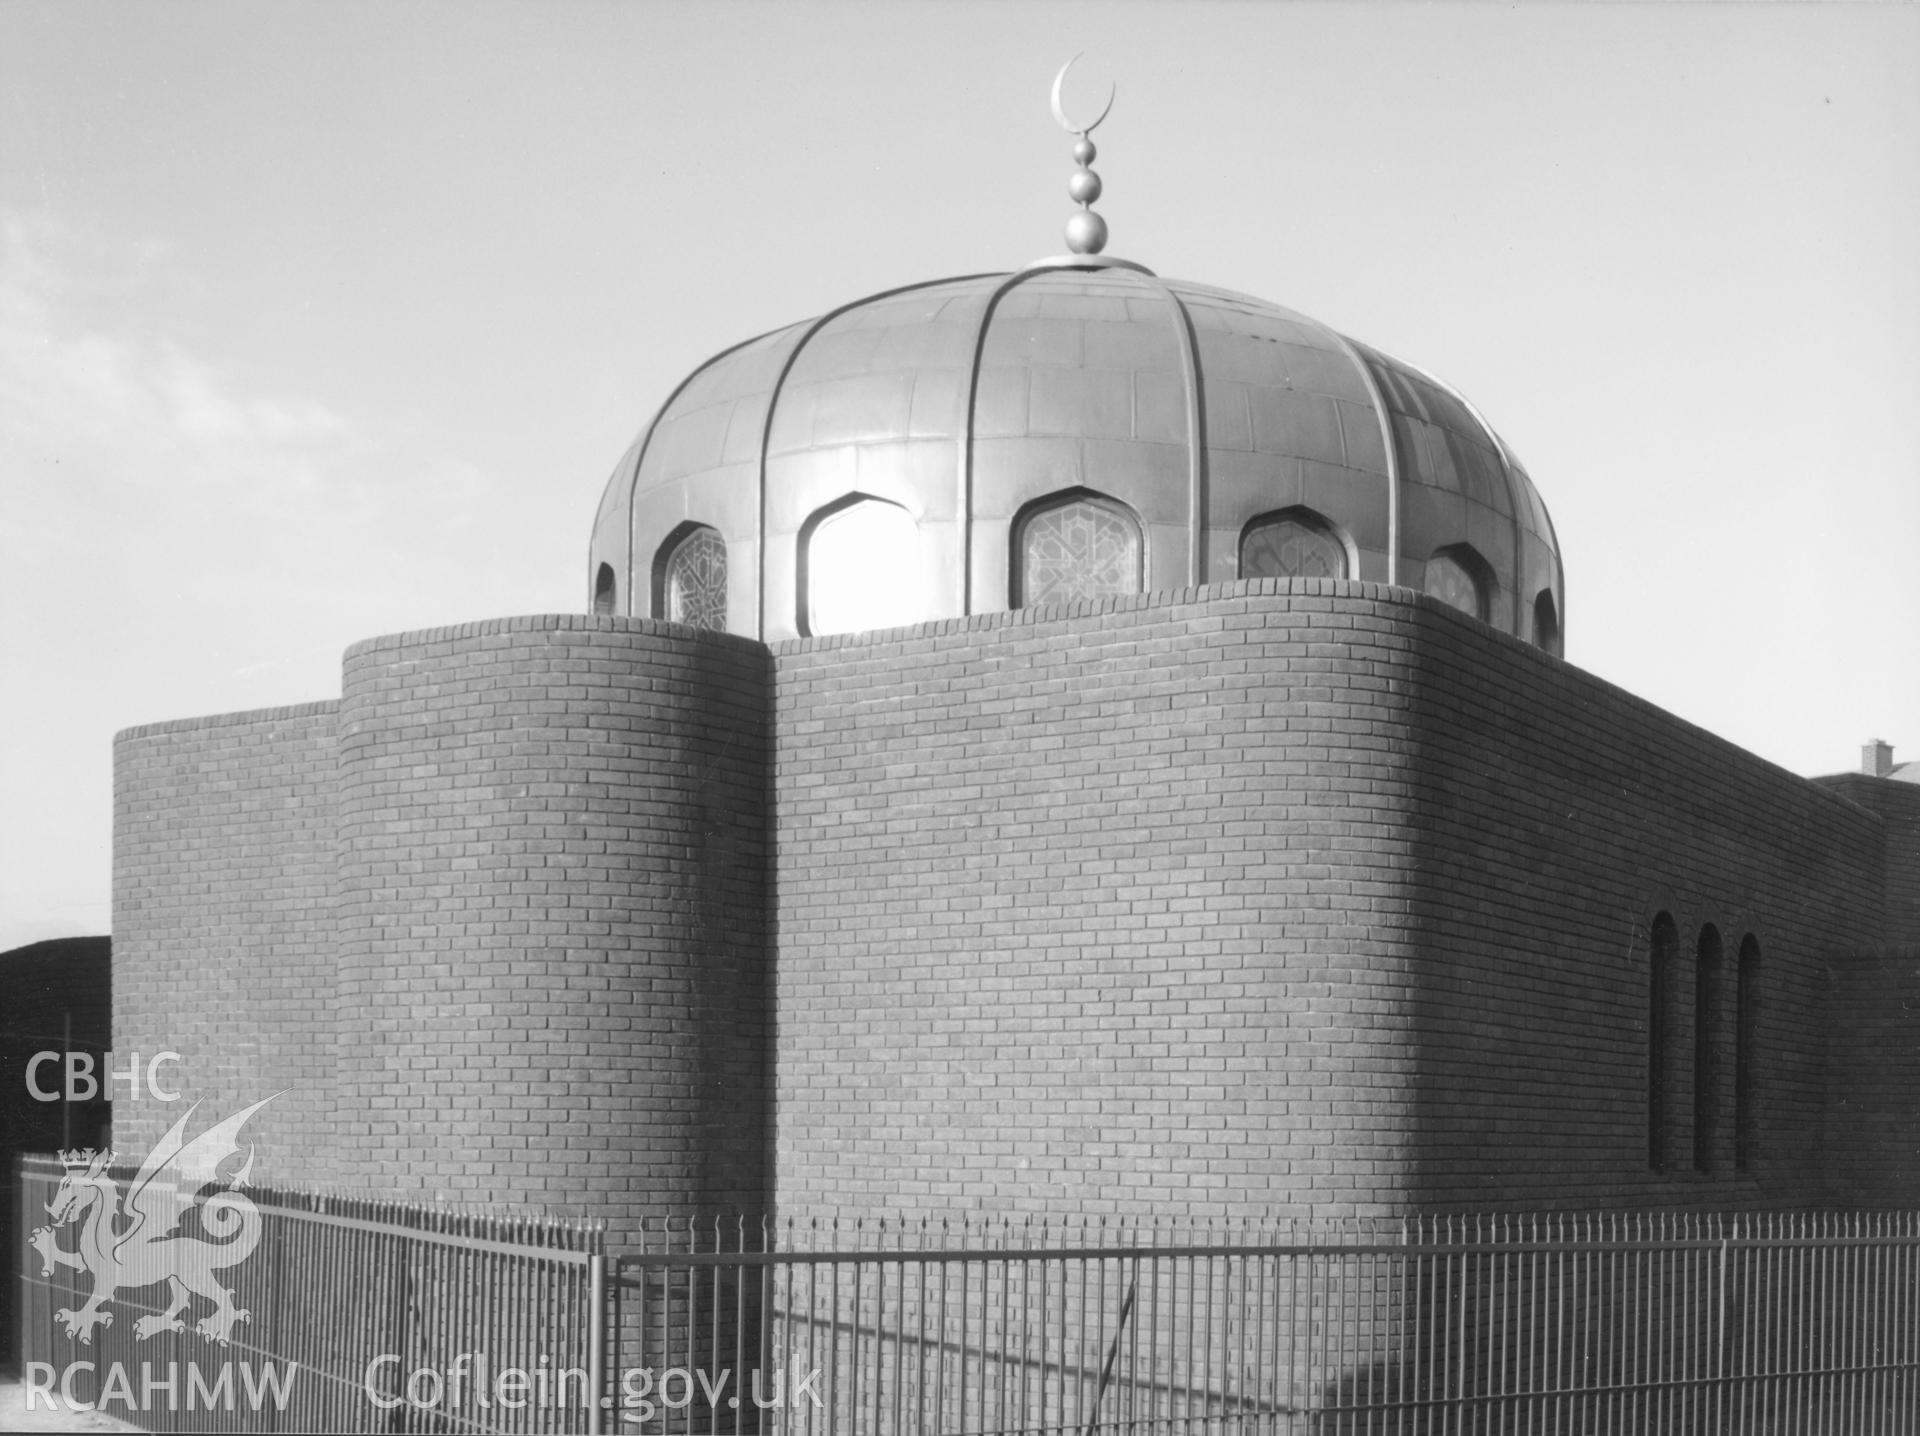 1 b/w print showing the South Wales Islamic Centre, Alice Street, Cardiff, collated by the former Central Office of Information.